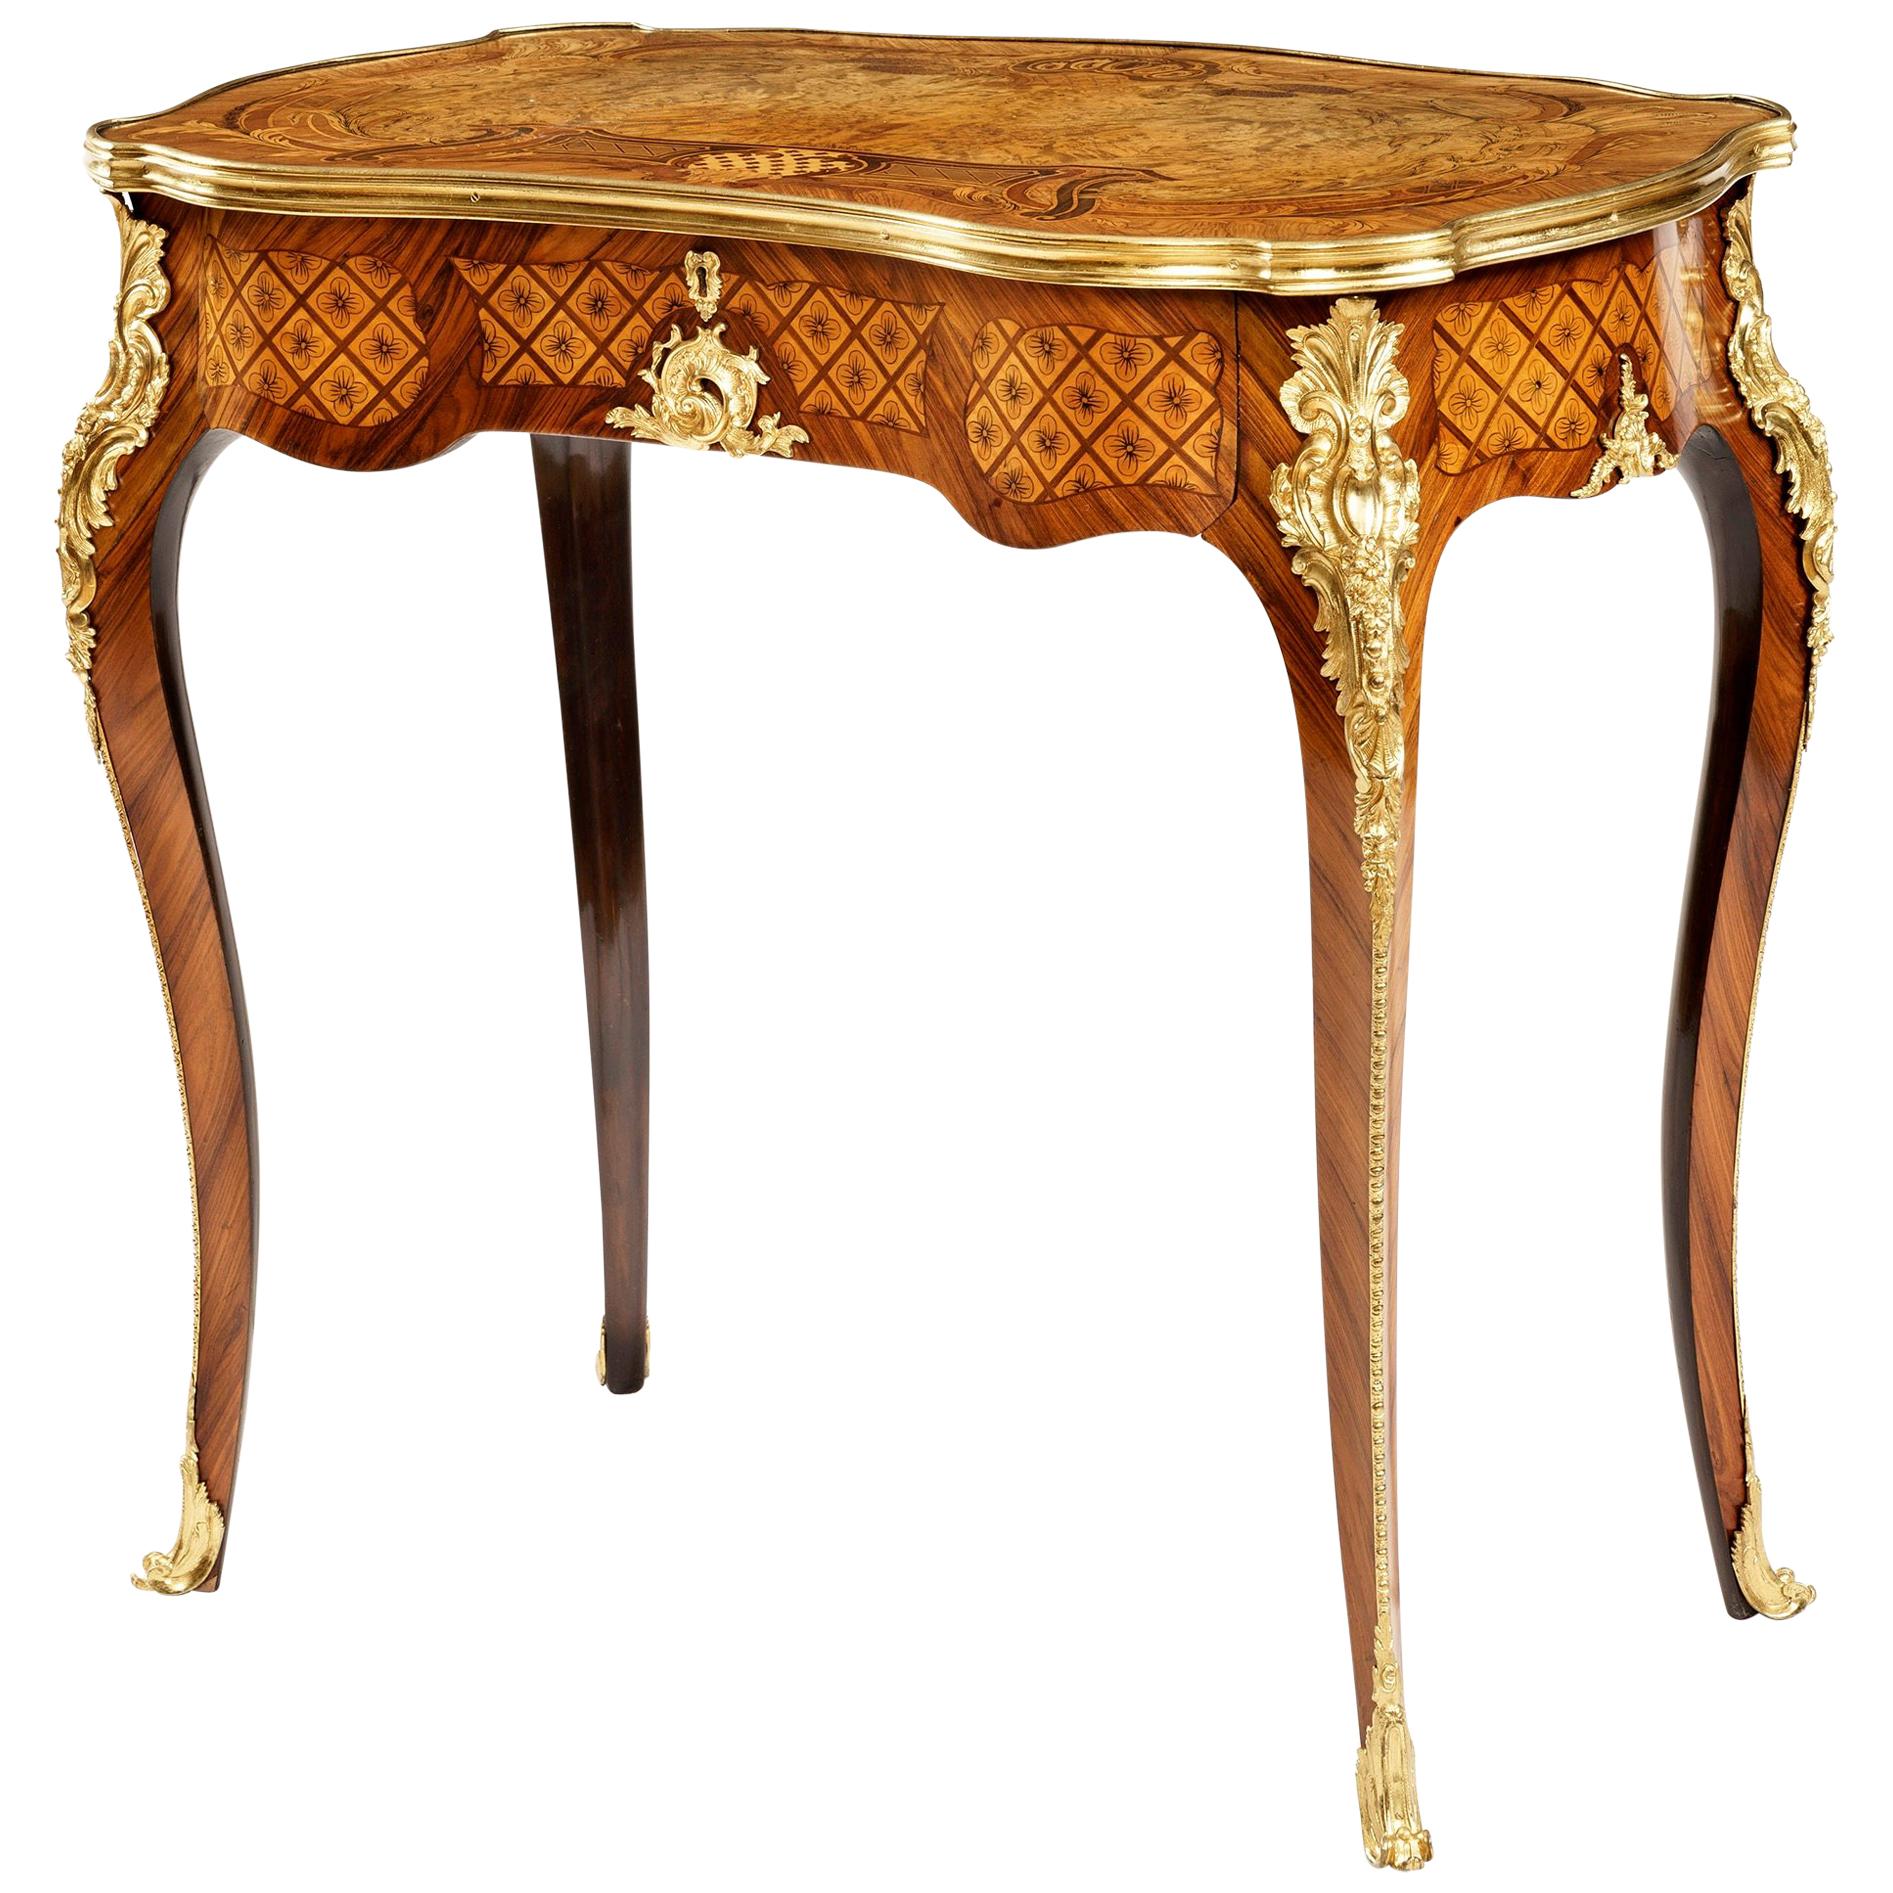 19th Century Walnut and Marquetry Occasional Table Attributed to Holland & Sons